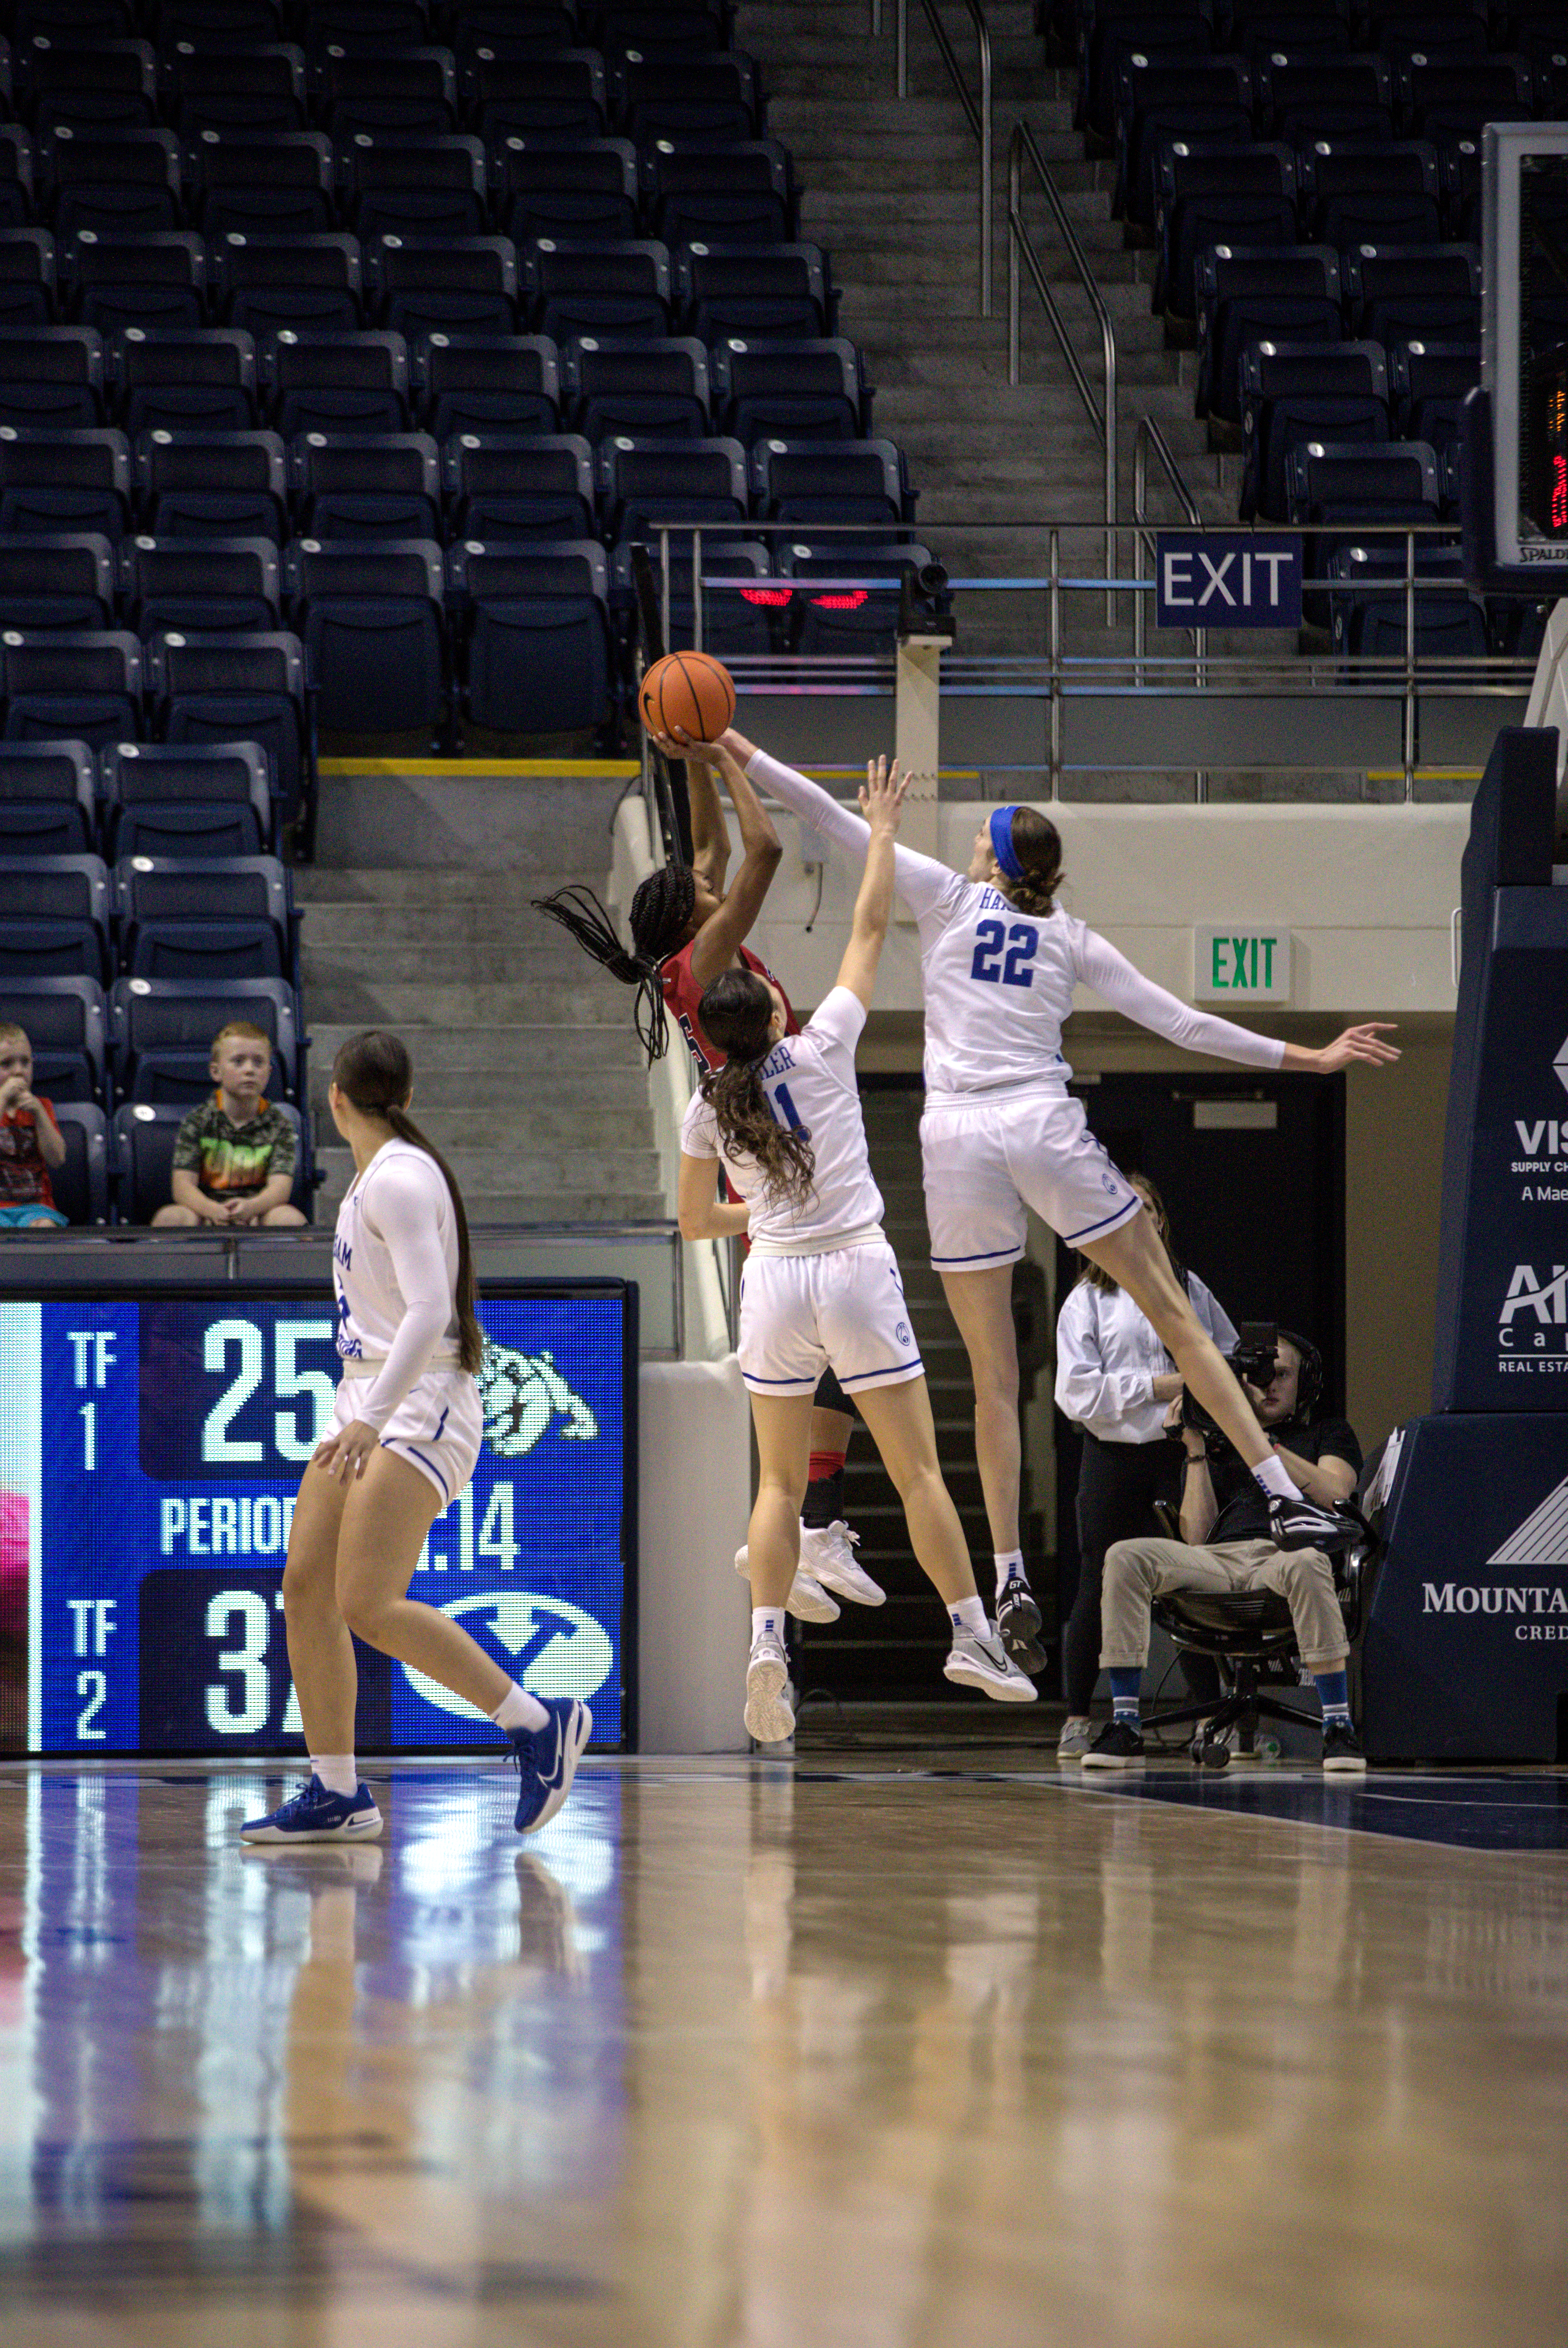 Sara Hamson blocks a shot in an 80-64 BYU win over the Fresno State Bulldogs in the Marriott Center.